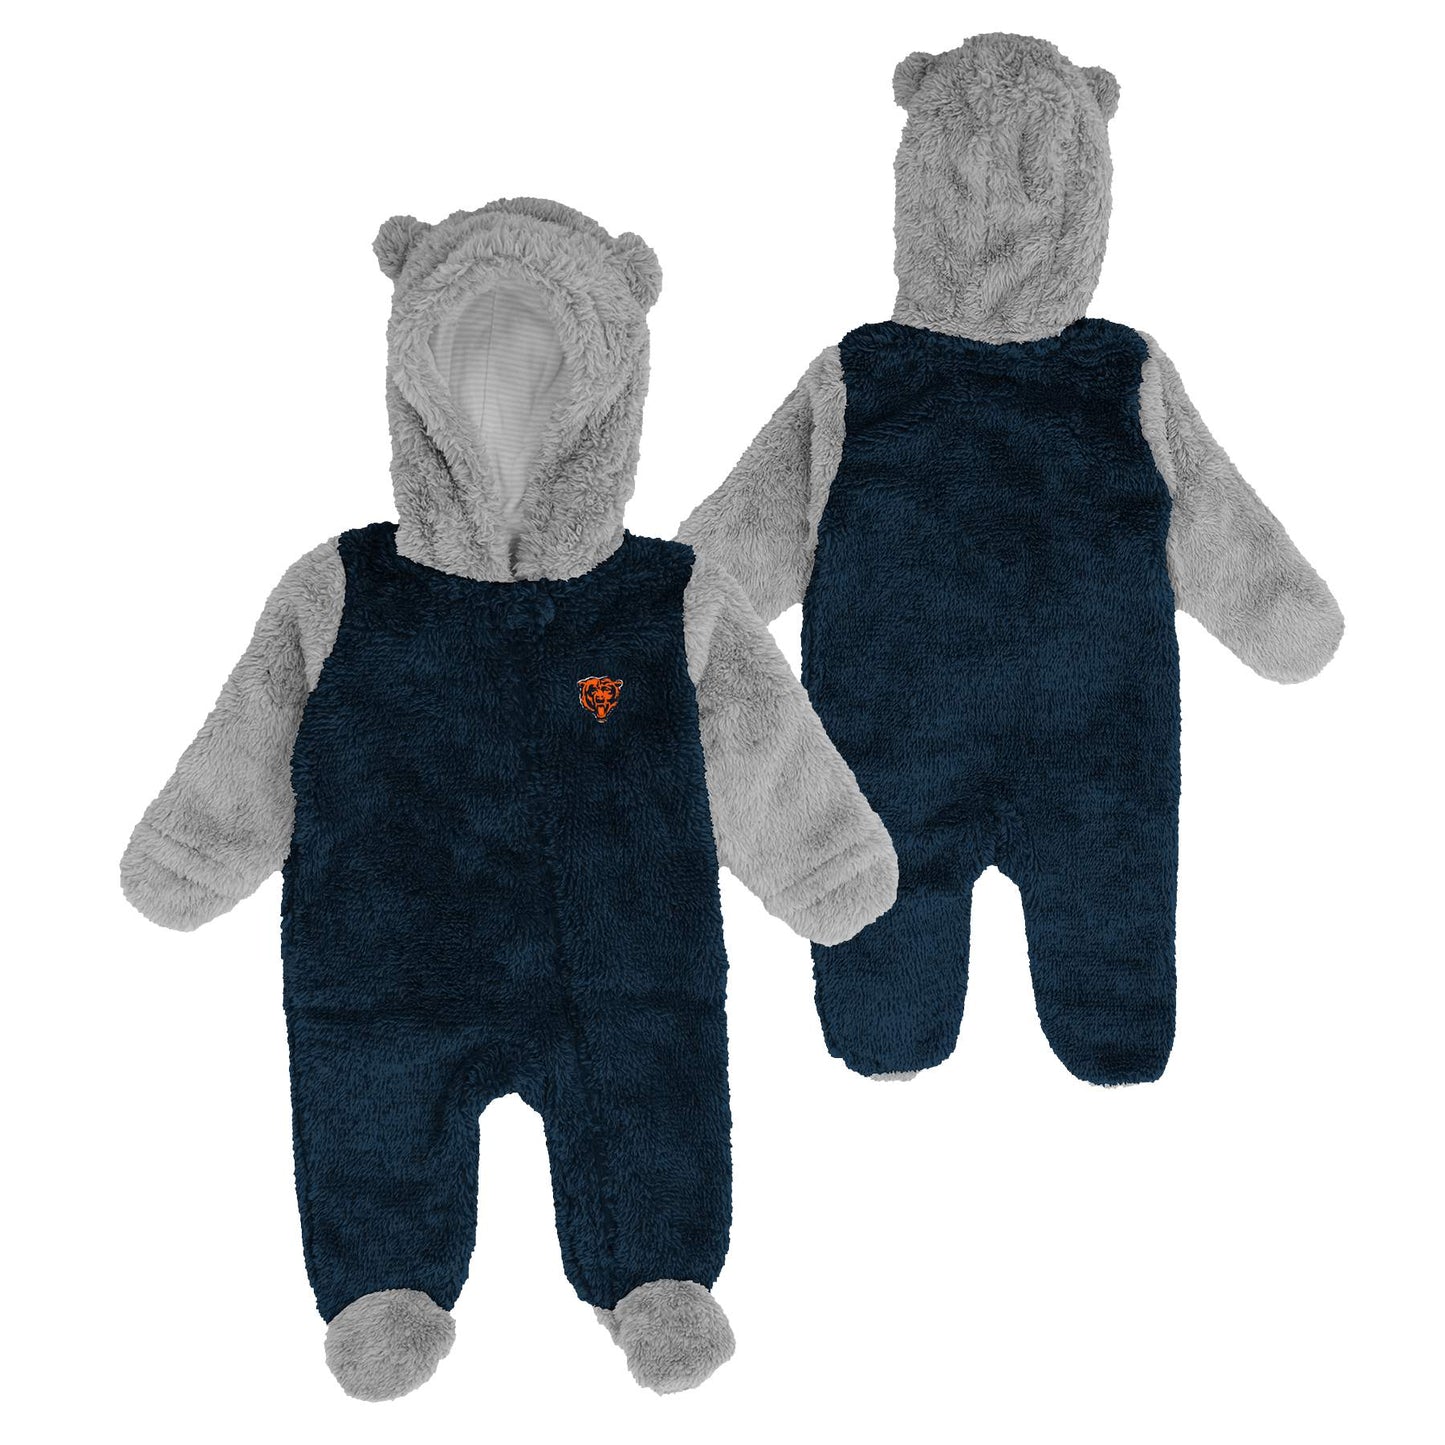 Chicago Bears Gametime Nap Bunting Coverall